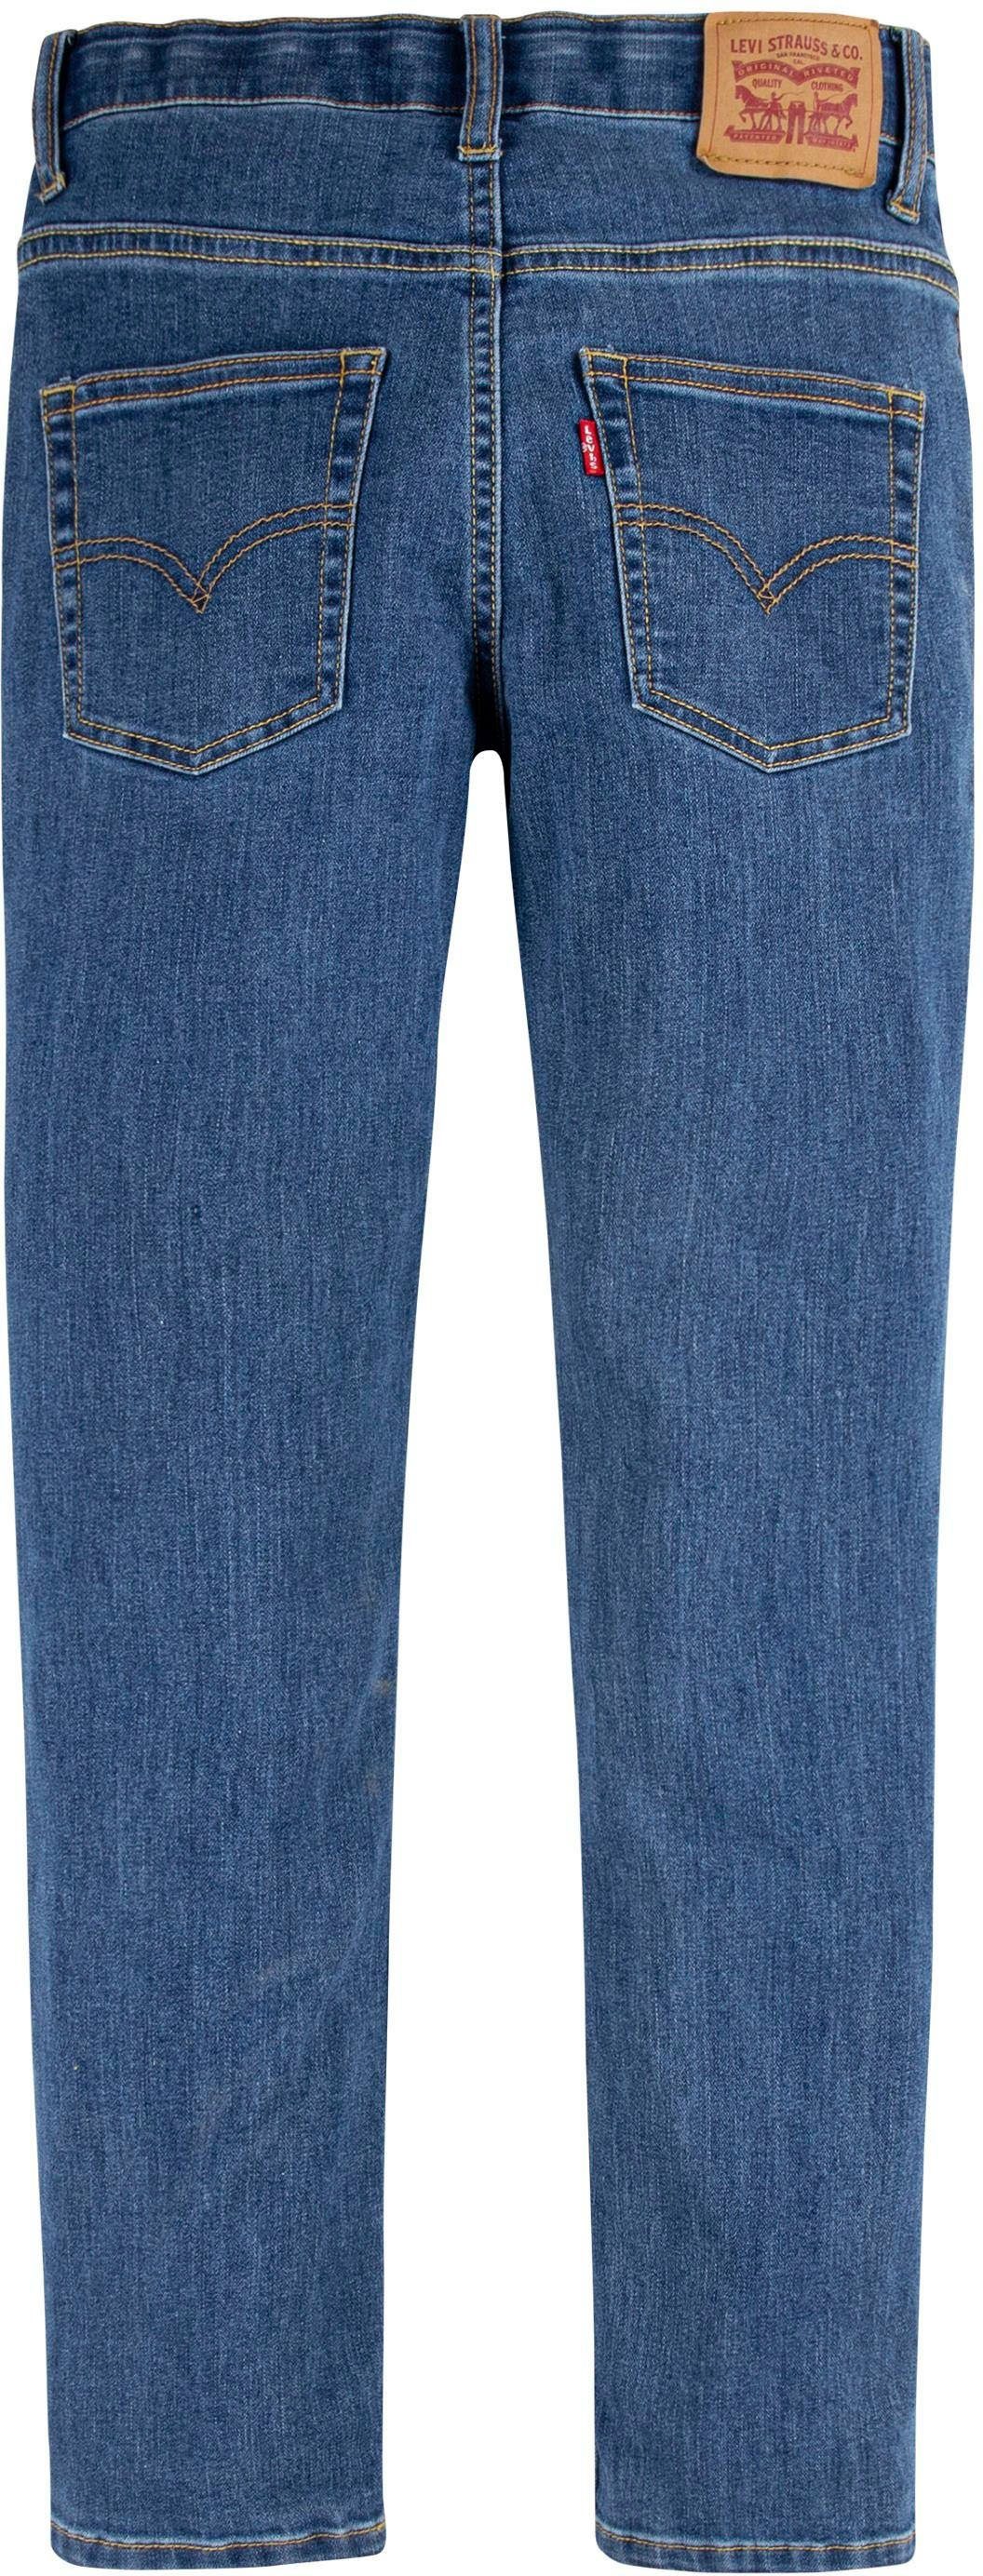 BOYS 512 Levi's® Stretch-Jeans PERFORMANCE GUY for GOOD STRONG Kids